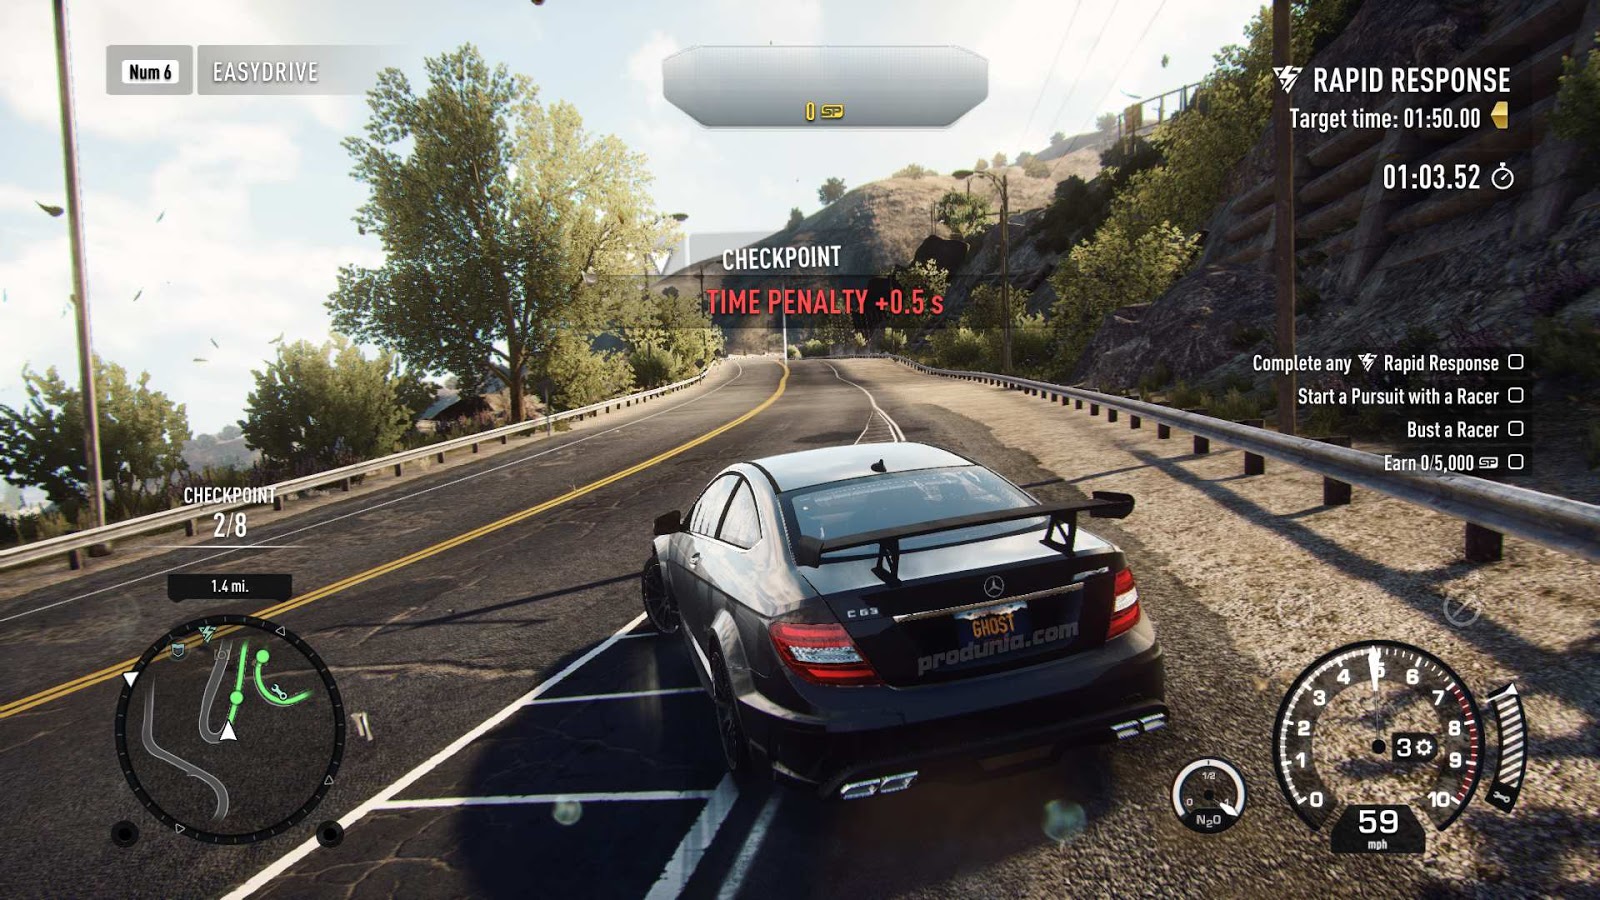 Need for speed rivals download for pc highly compressed only in 3.06 GB